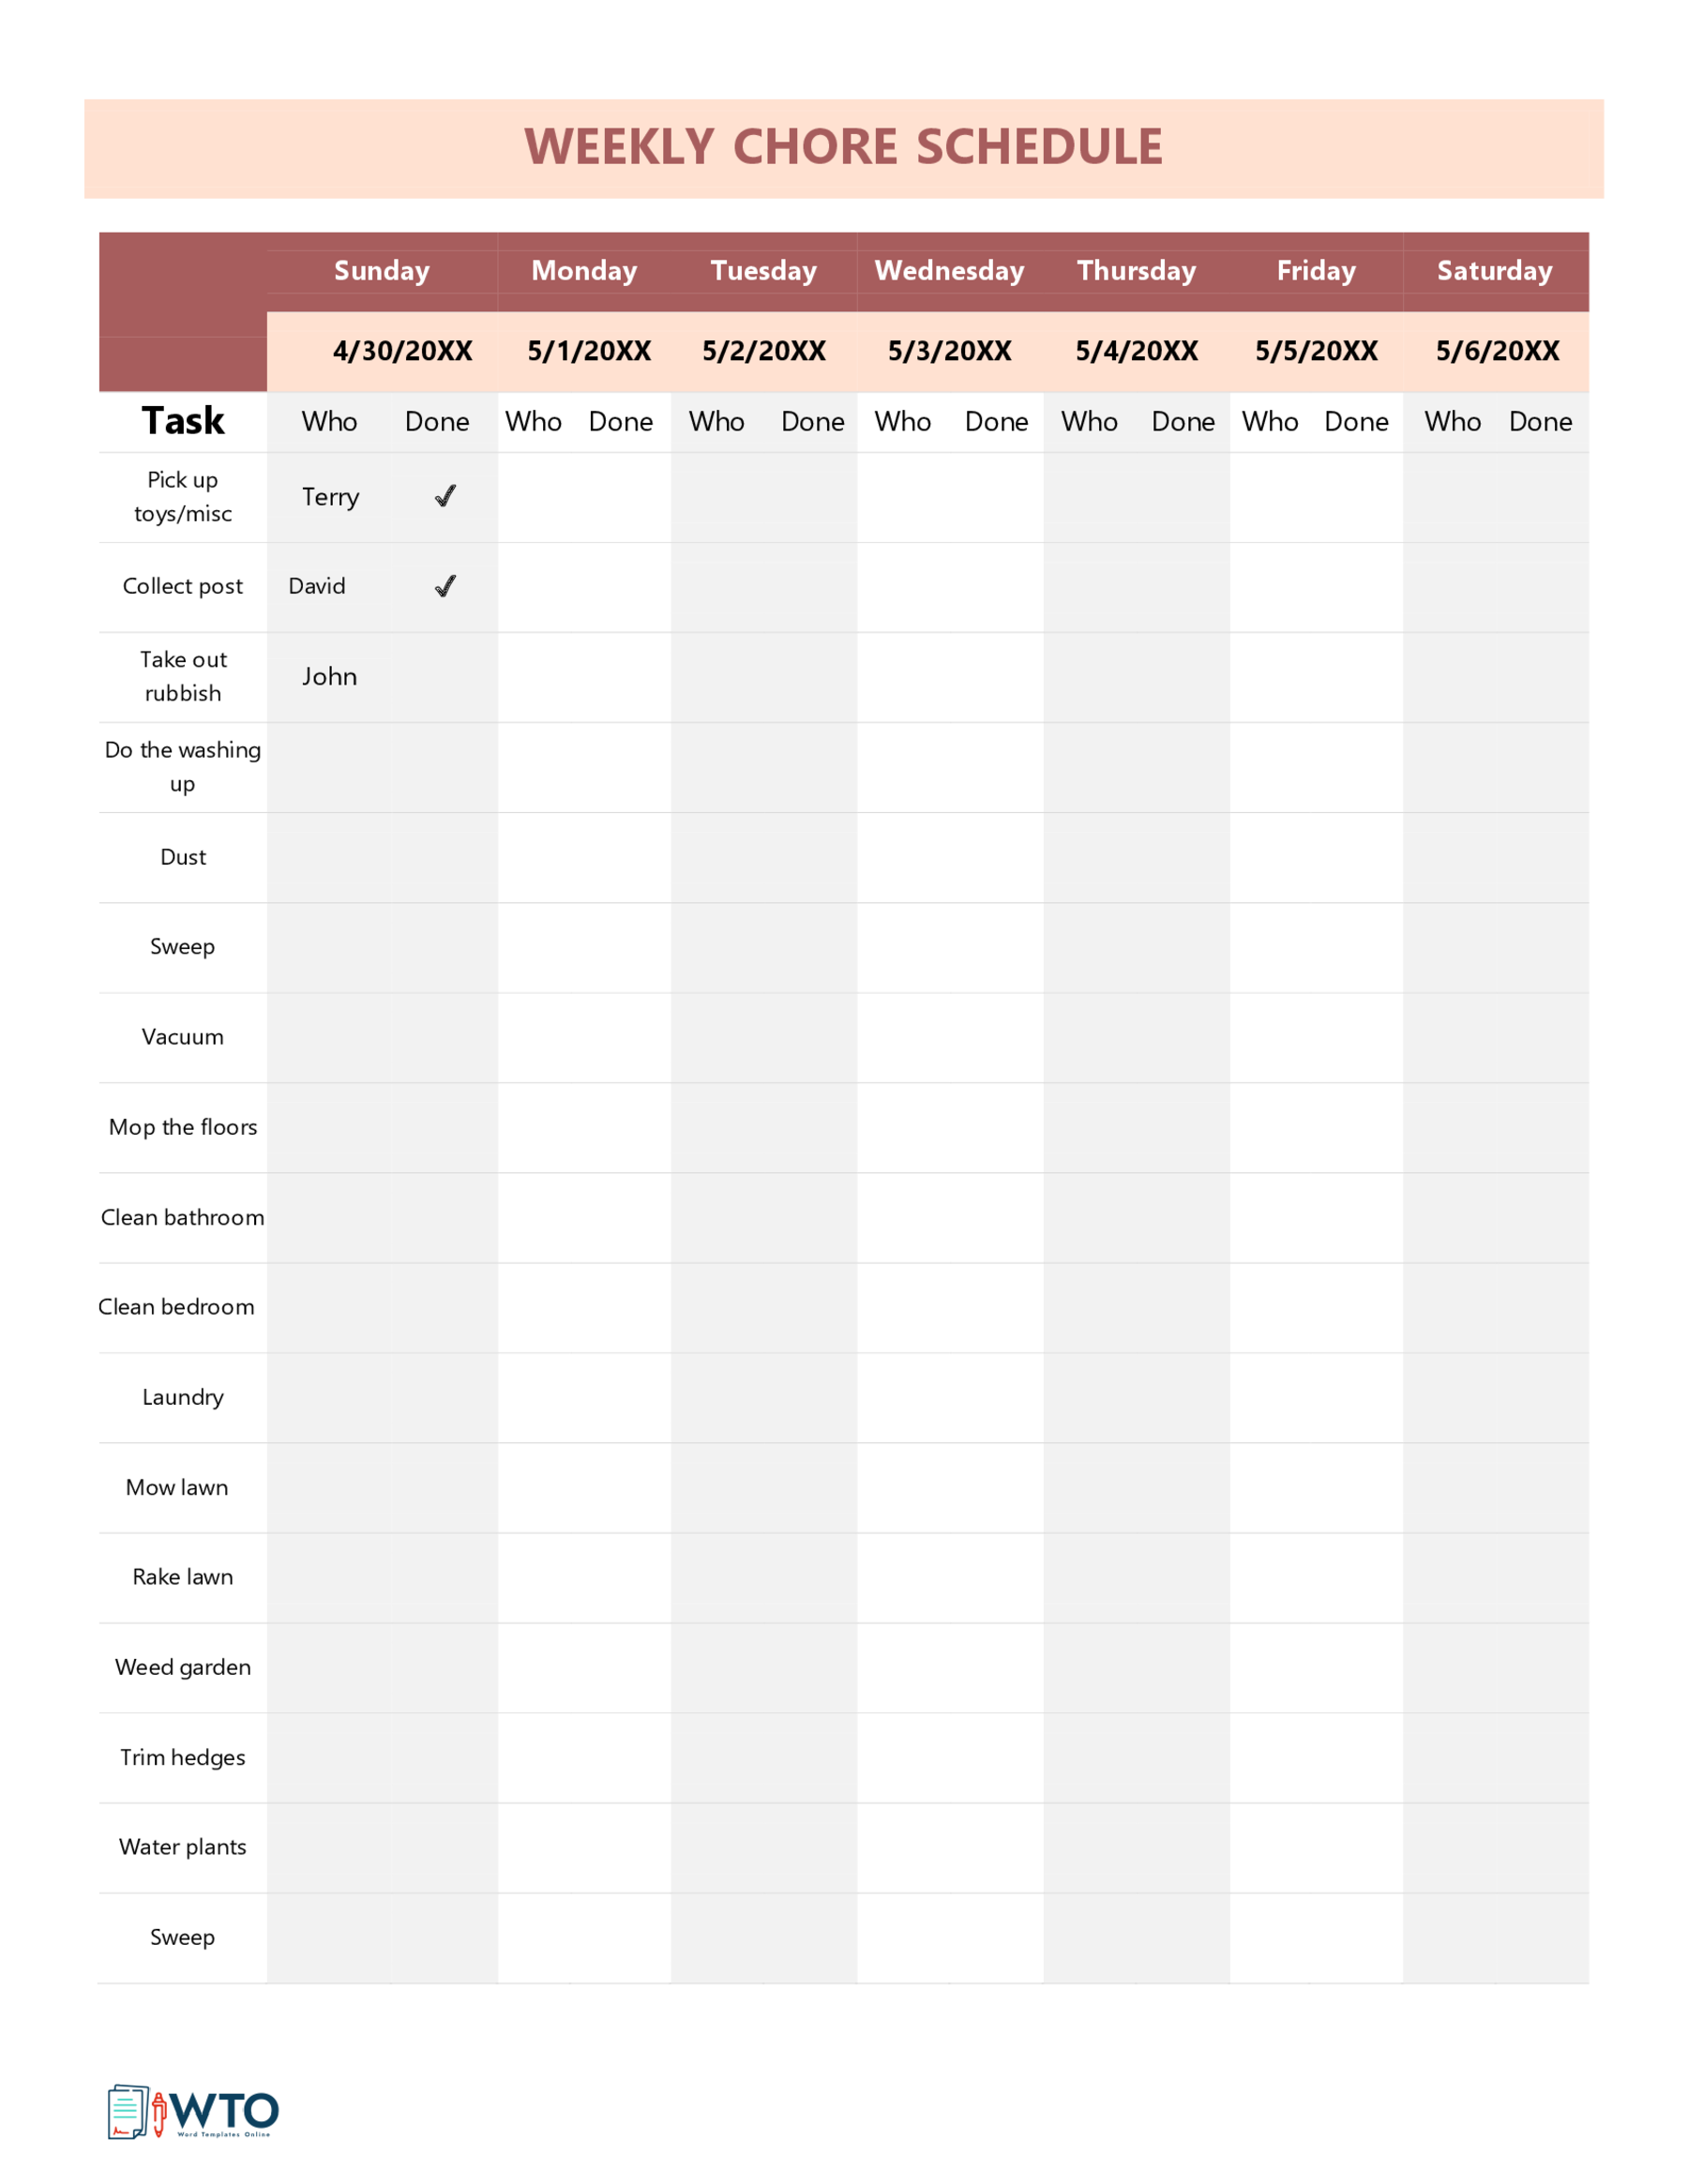 Weekly Chores Schedule Example - Sample Document